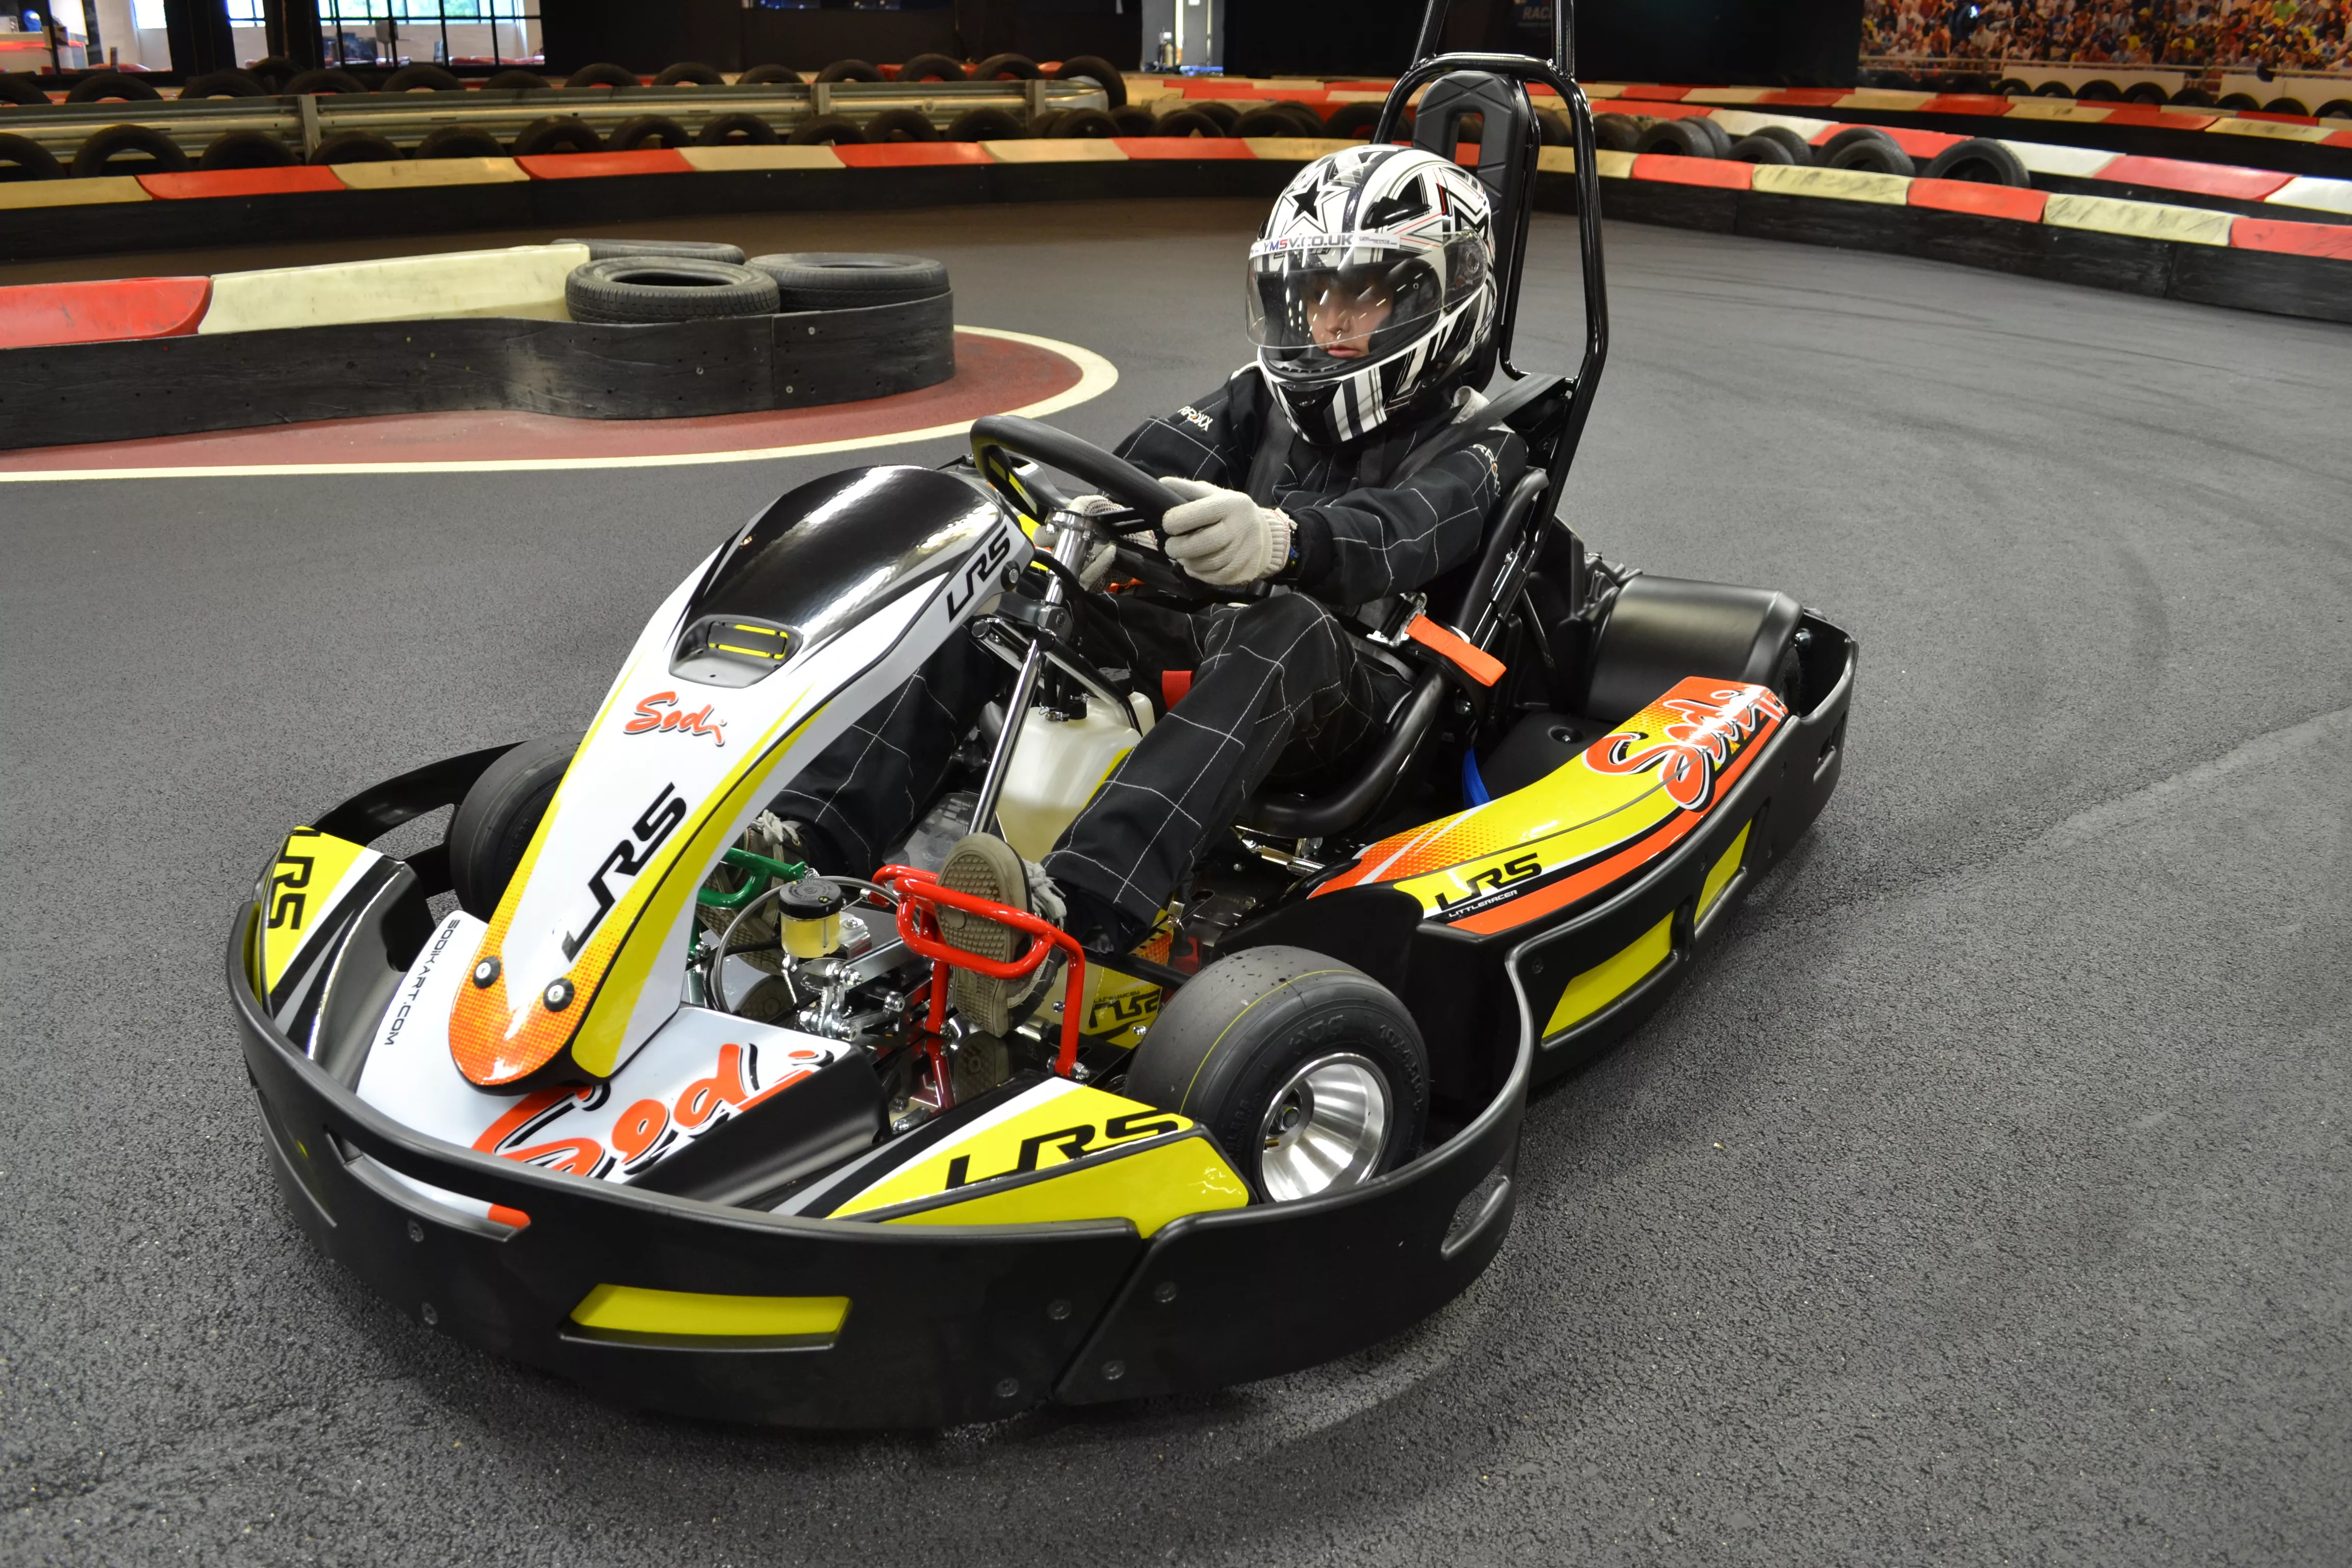 R1 Indoor Karting in USA, North America | Karting - Rated 4.4